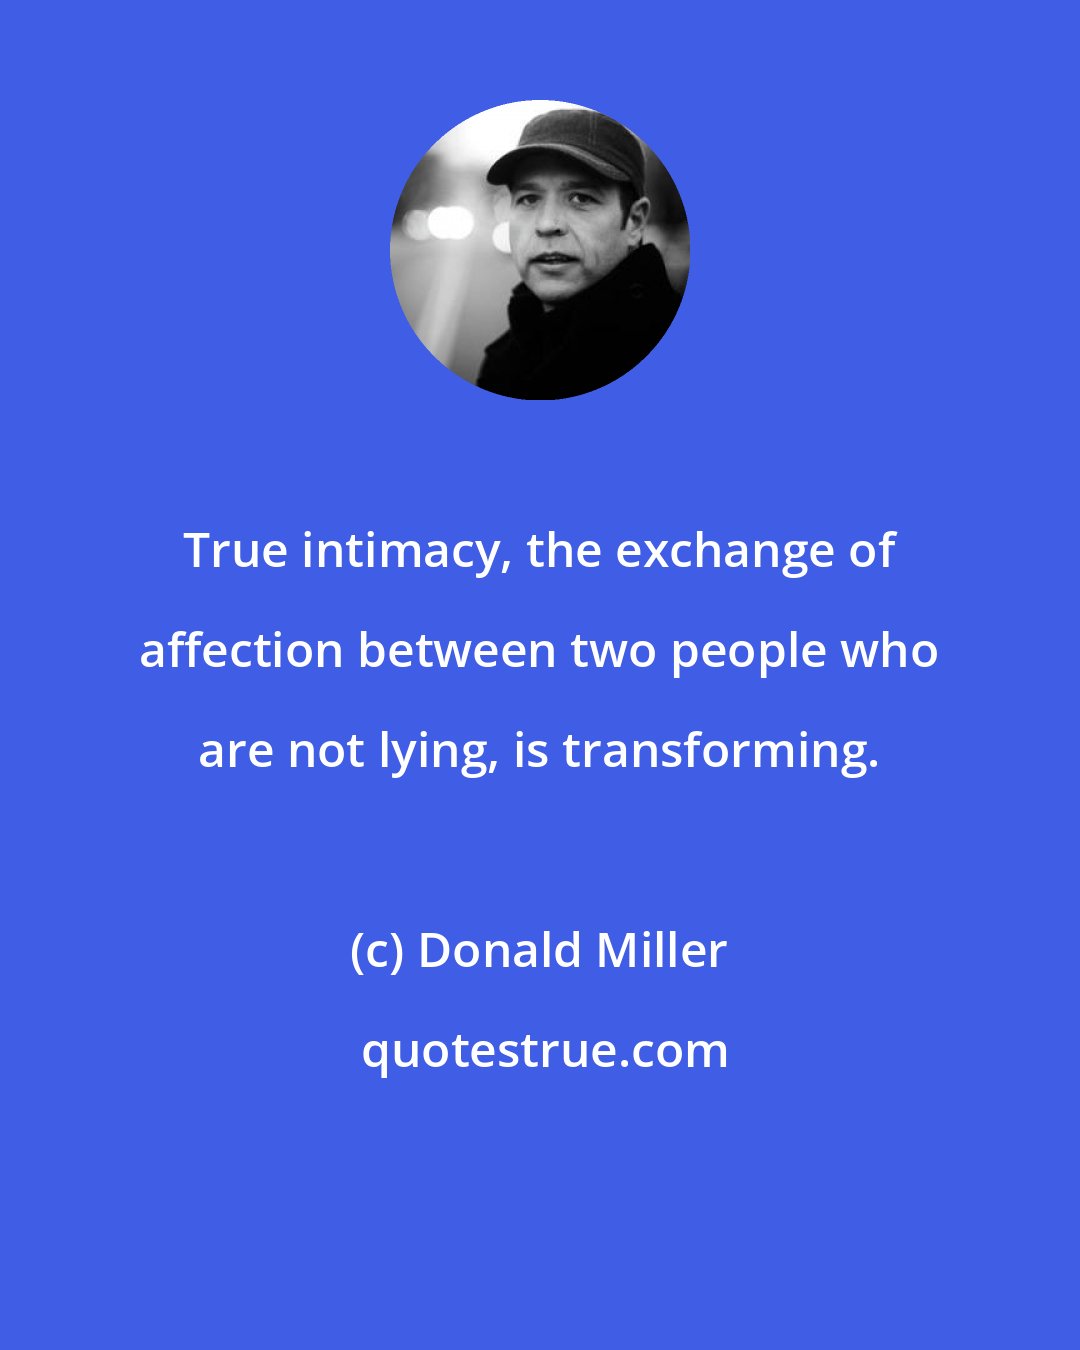 Donald Miller: True intimacy, the exchange of affection between two people who are not lying, is transforming.